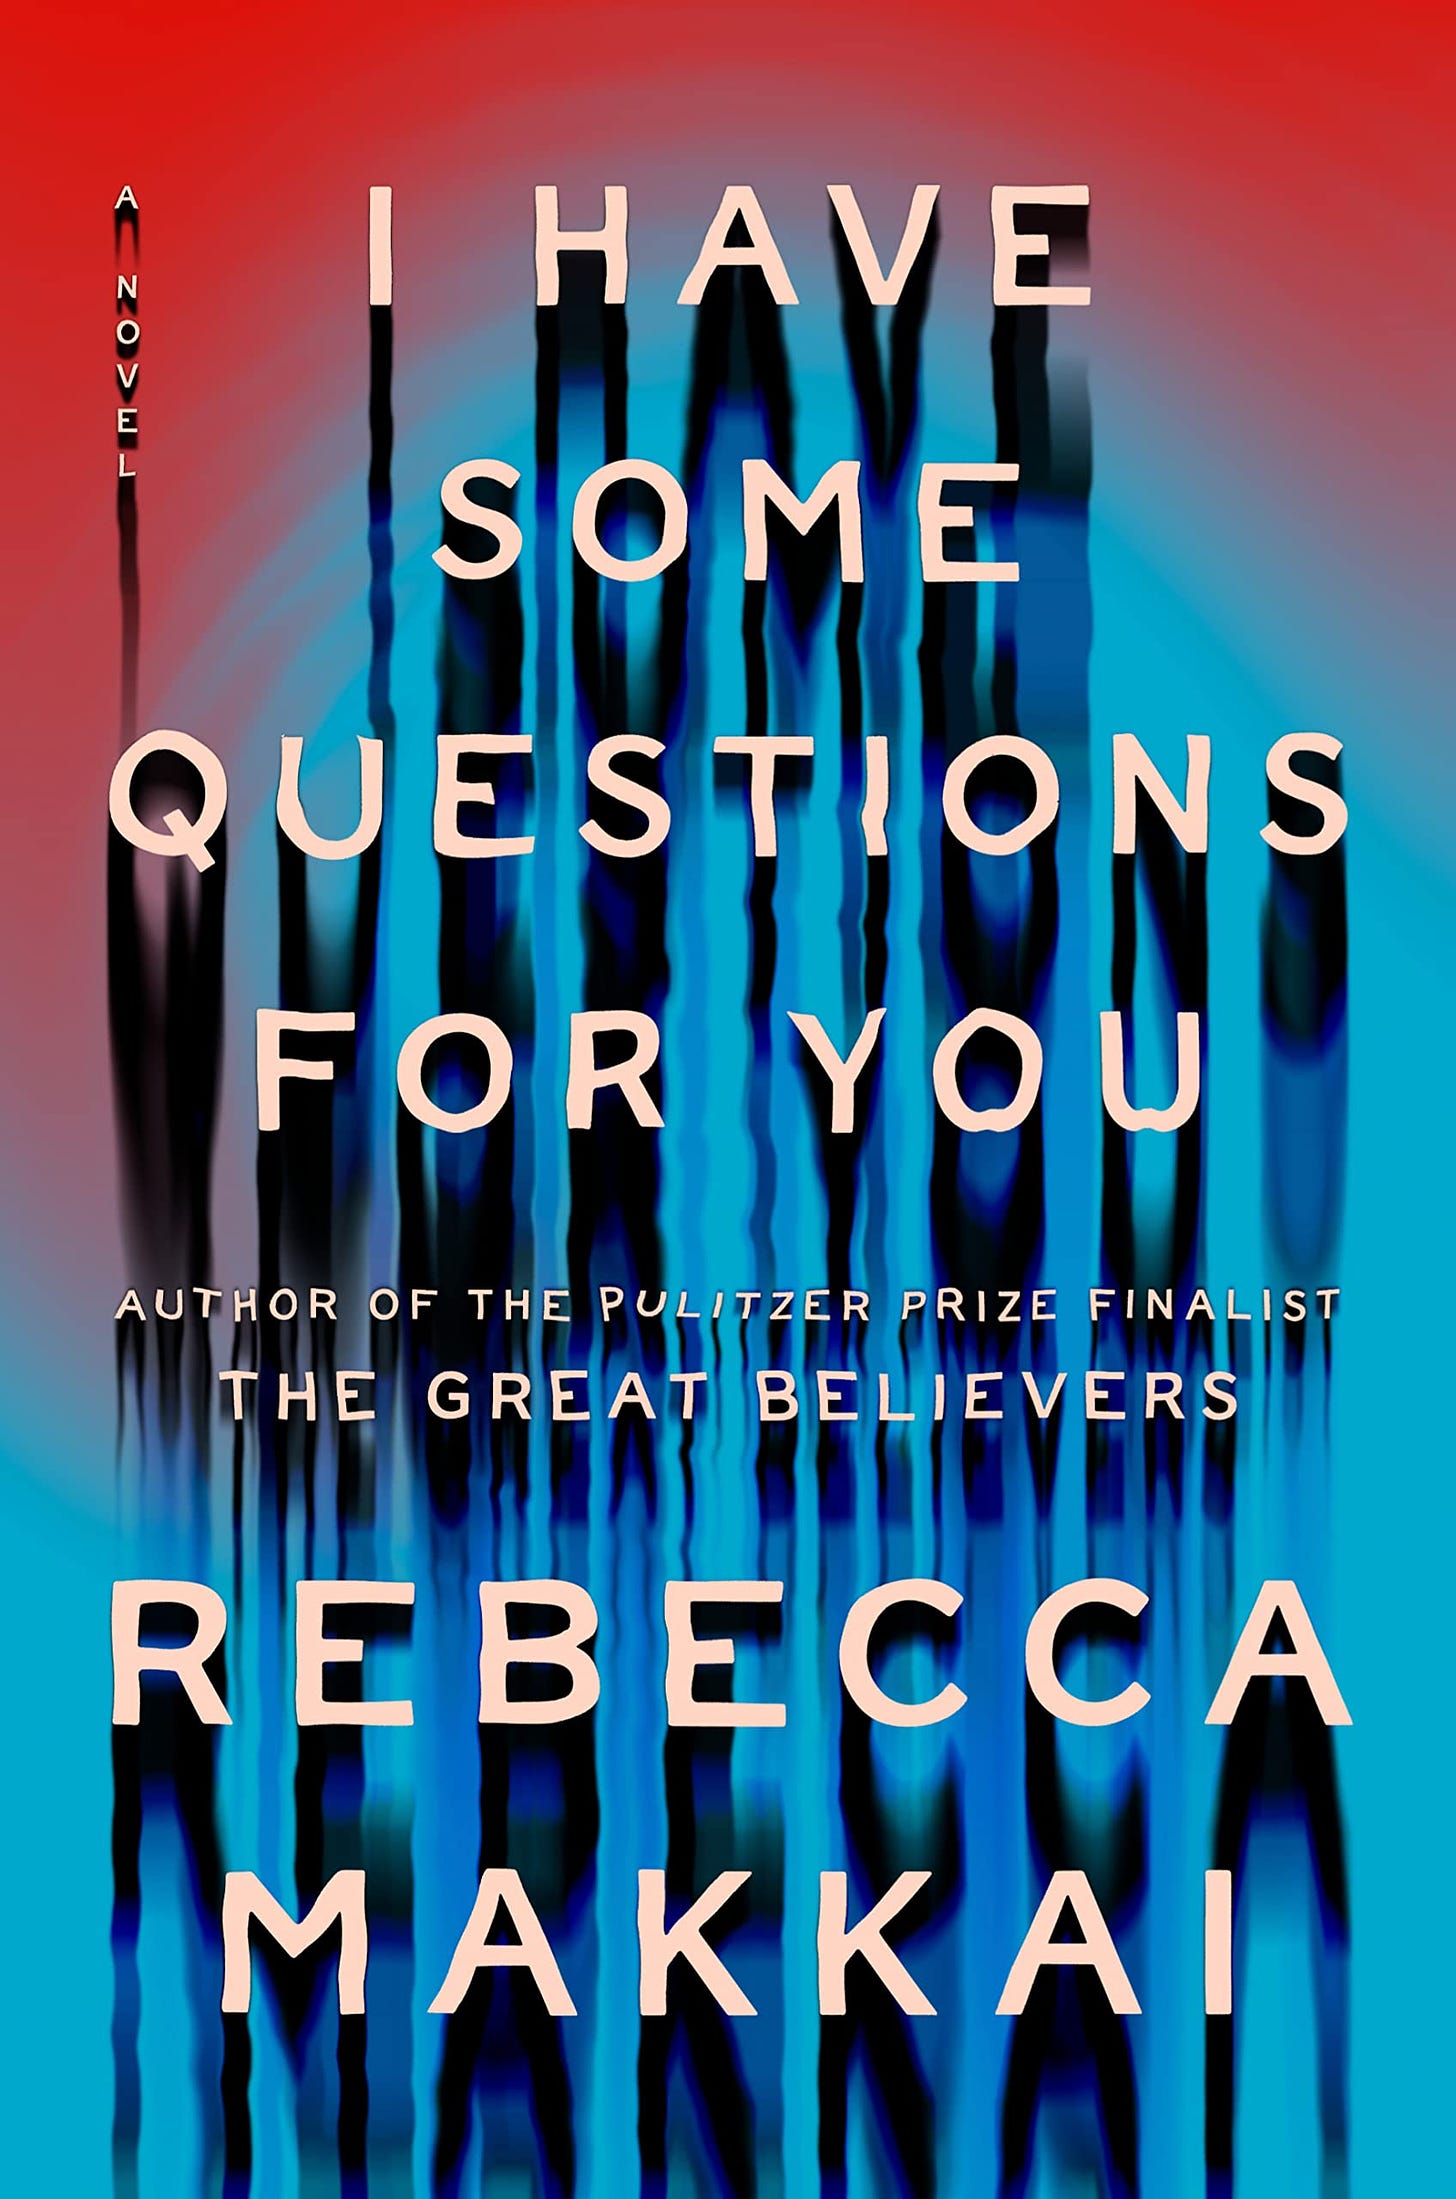 Book Cover: I have some questions for you, Rebecca Makkai